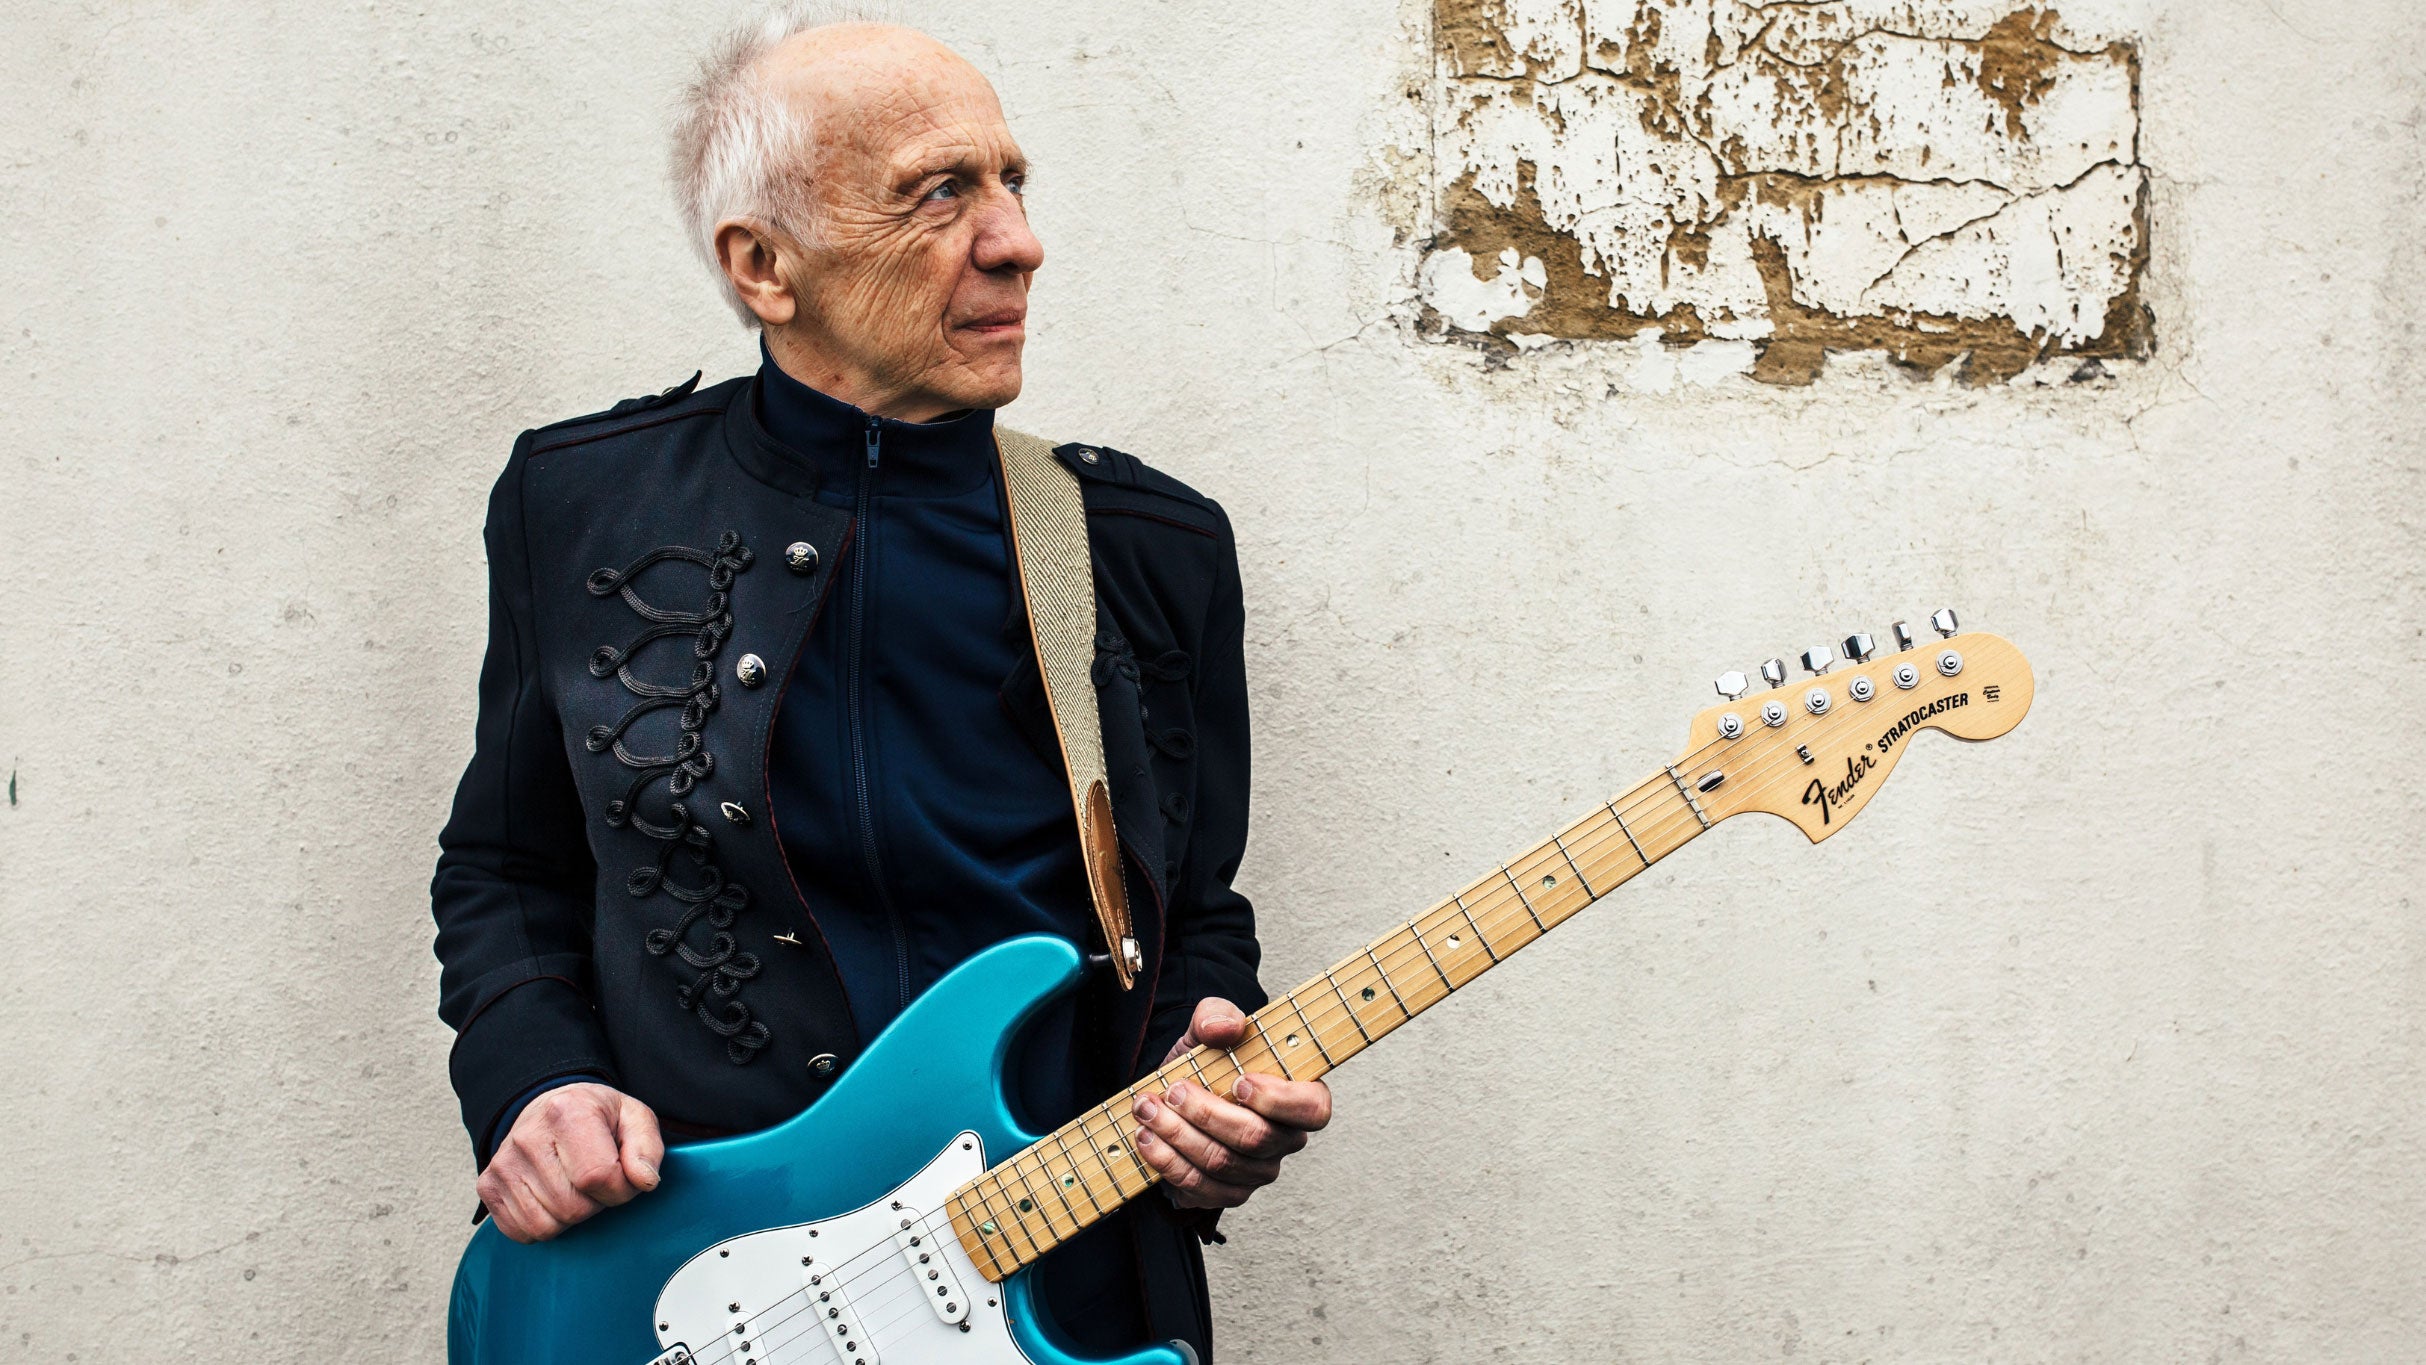 accurate presale c0de for Robin Trower face value tickets in Northfield at MGM Northfield Park - Center Stage